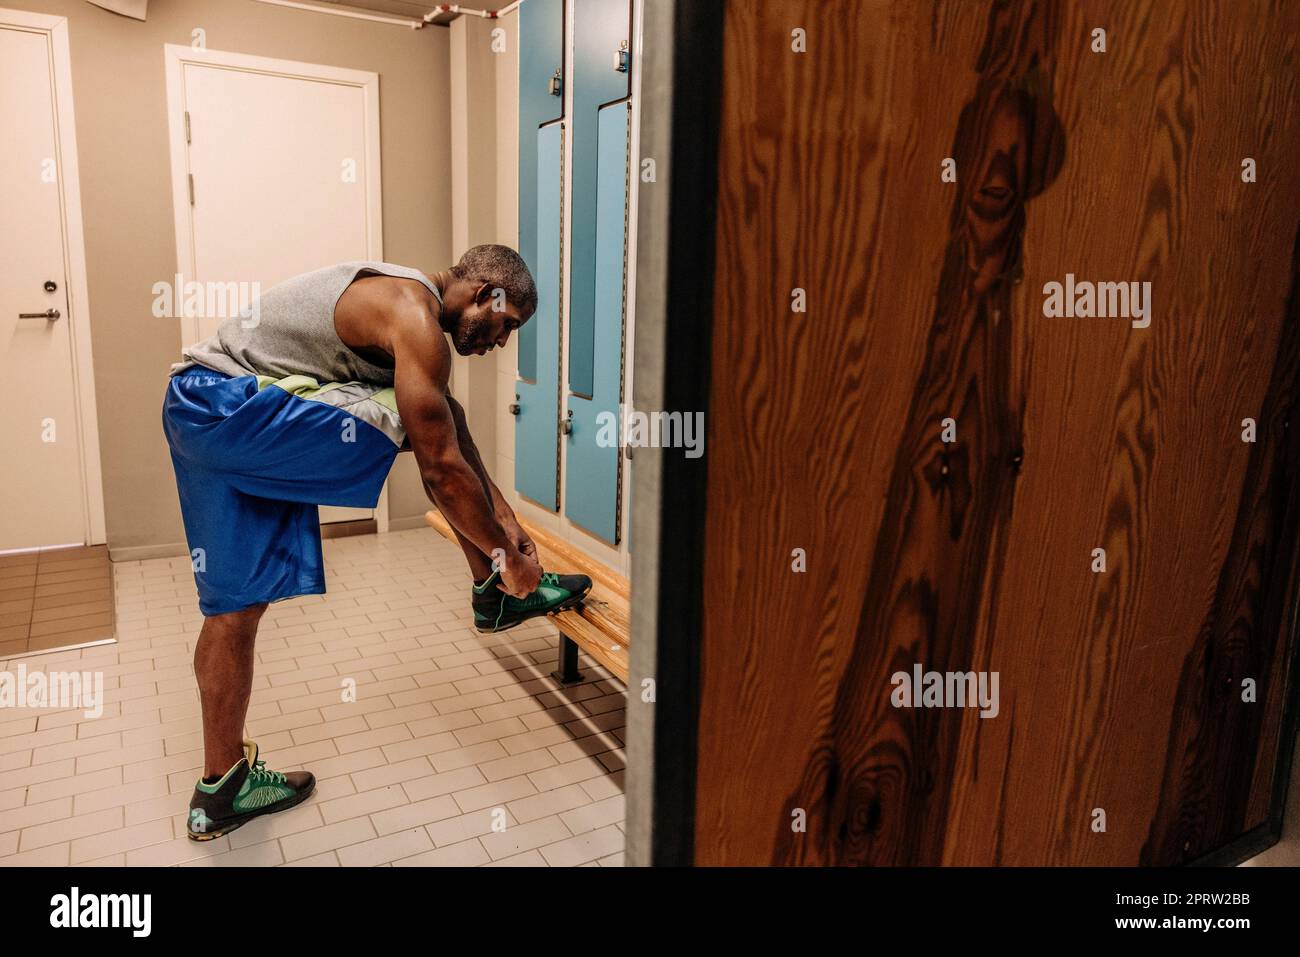 Side view of male athlete tying shoe lace in locker room Stock Photo